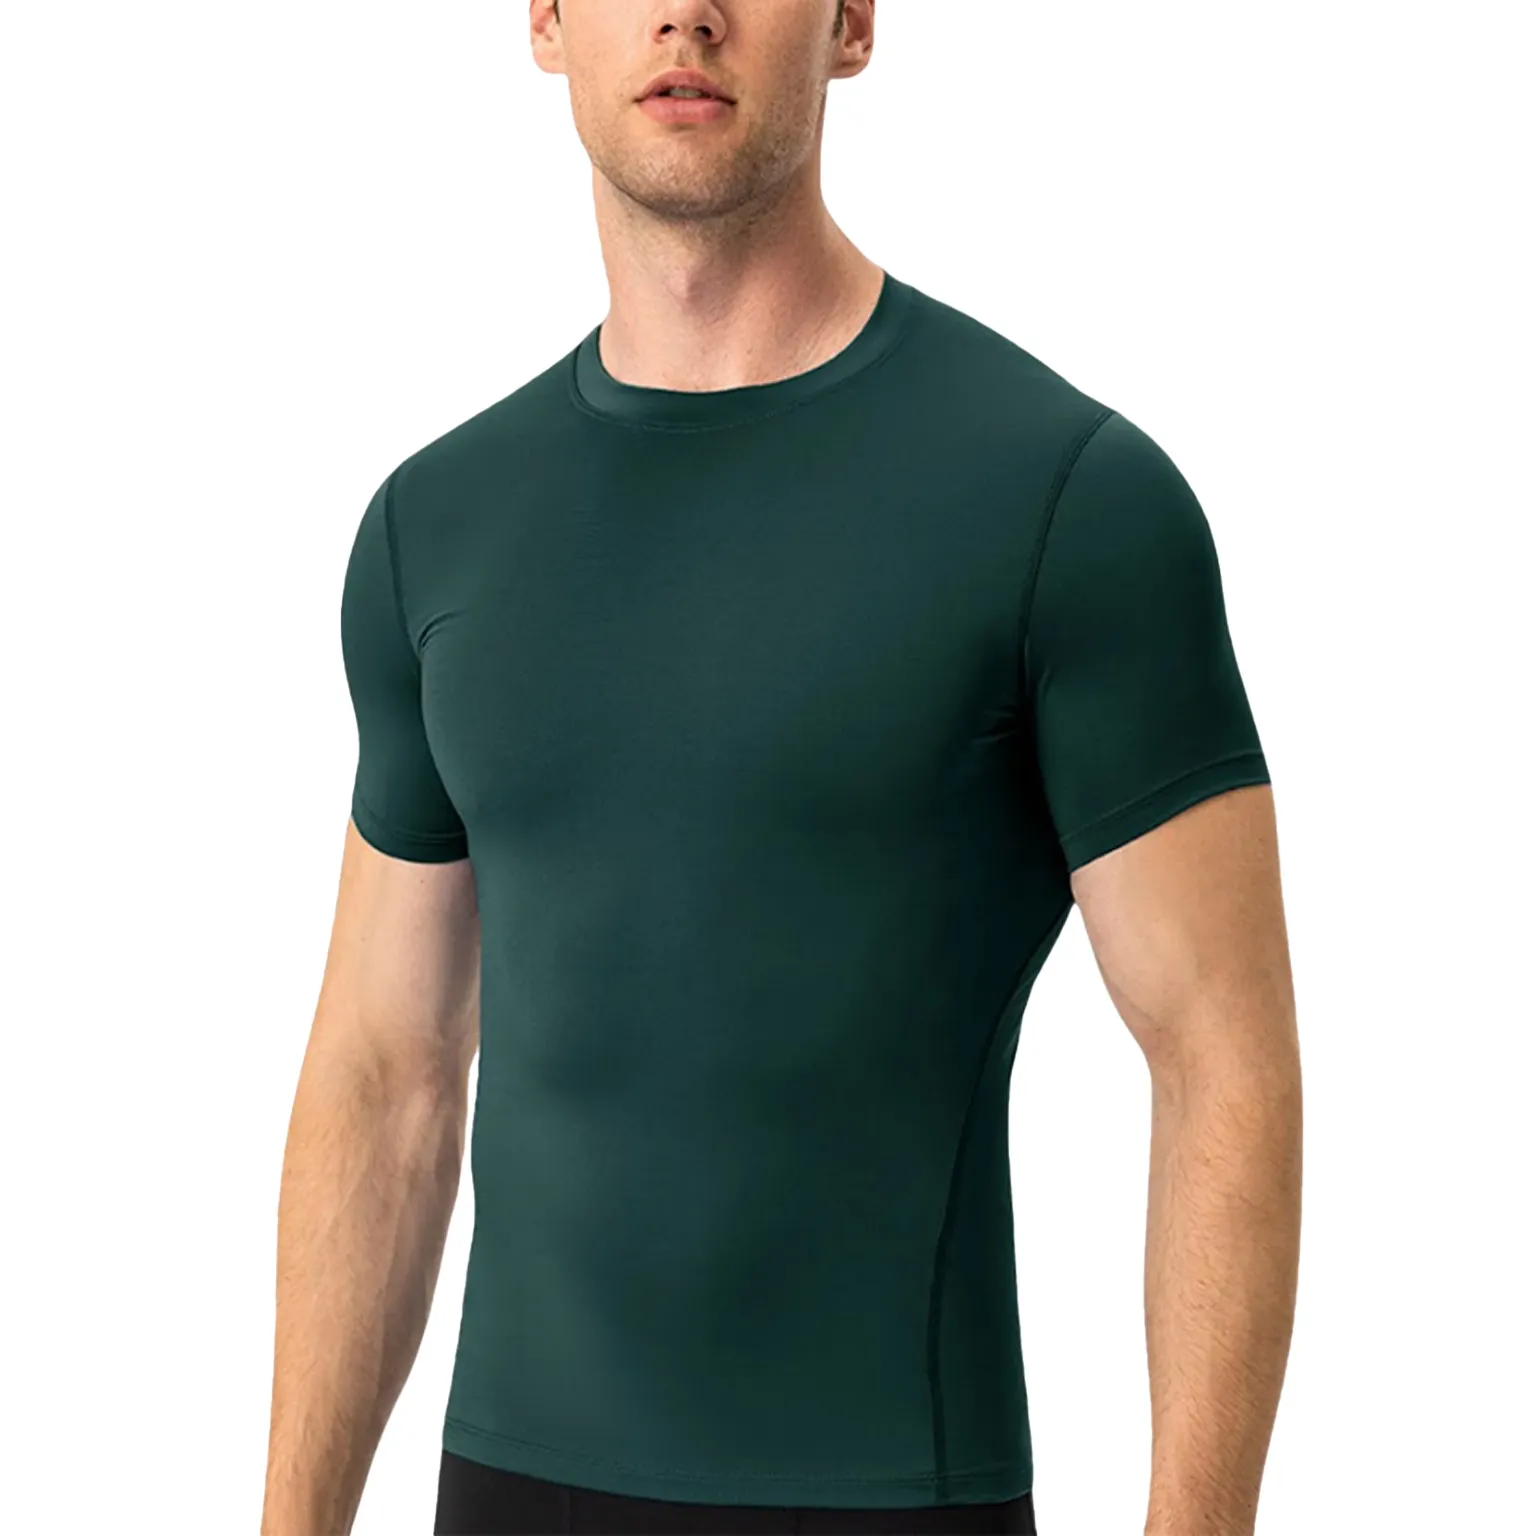 Compression Shirts manufacturing with trendy design